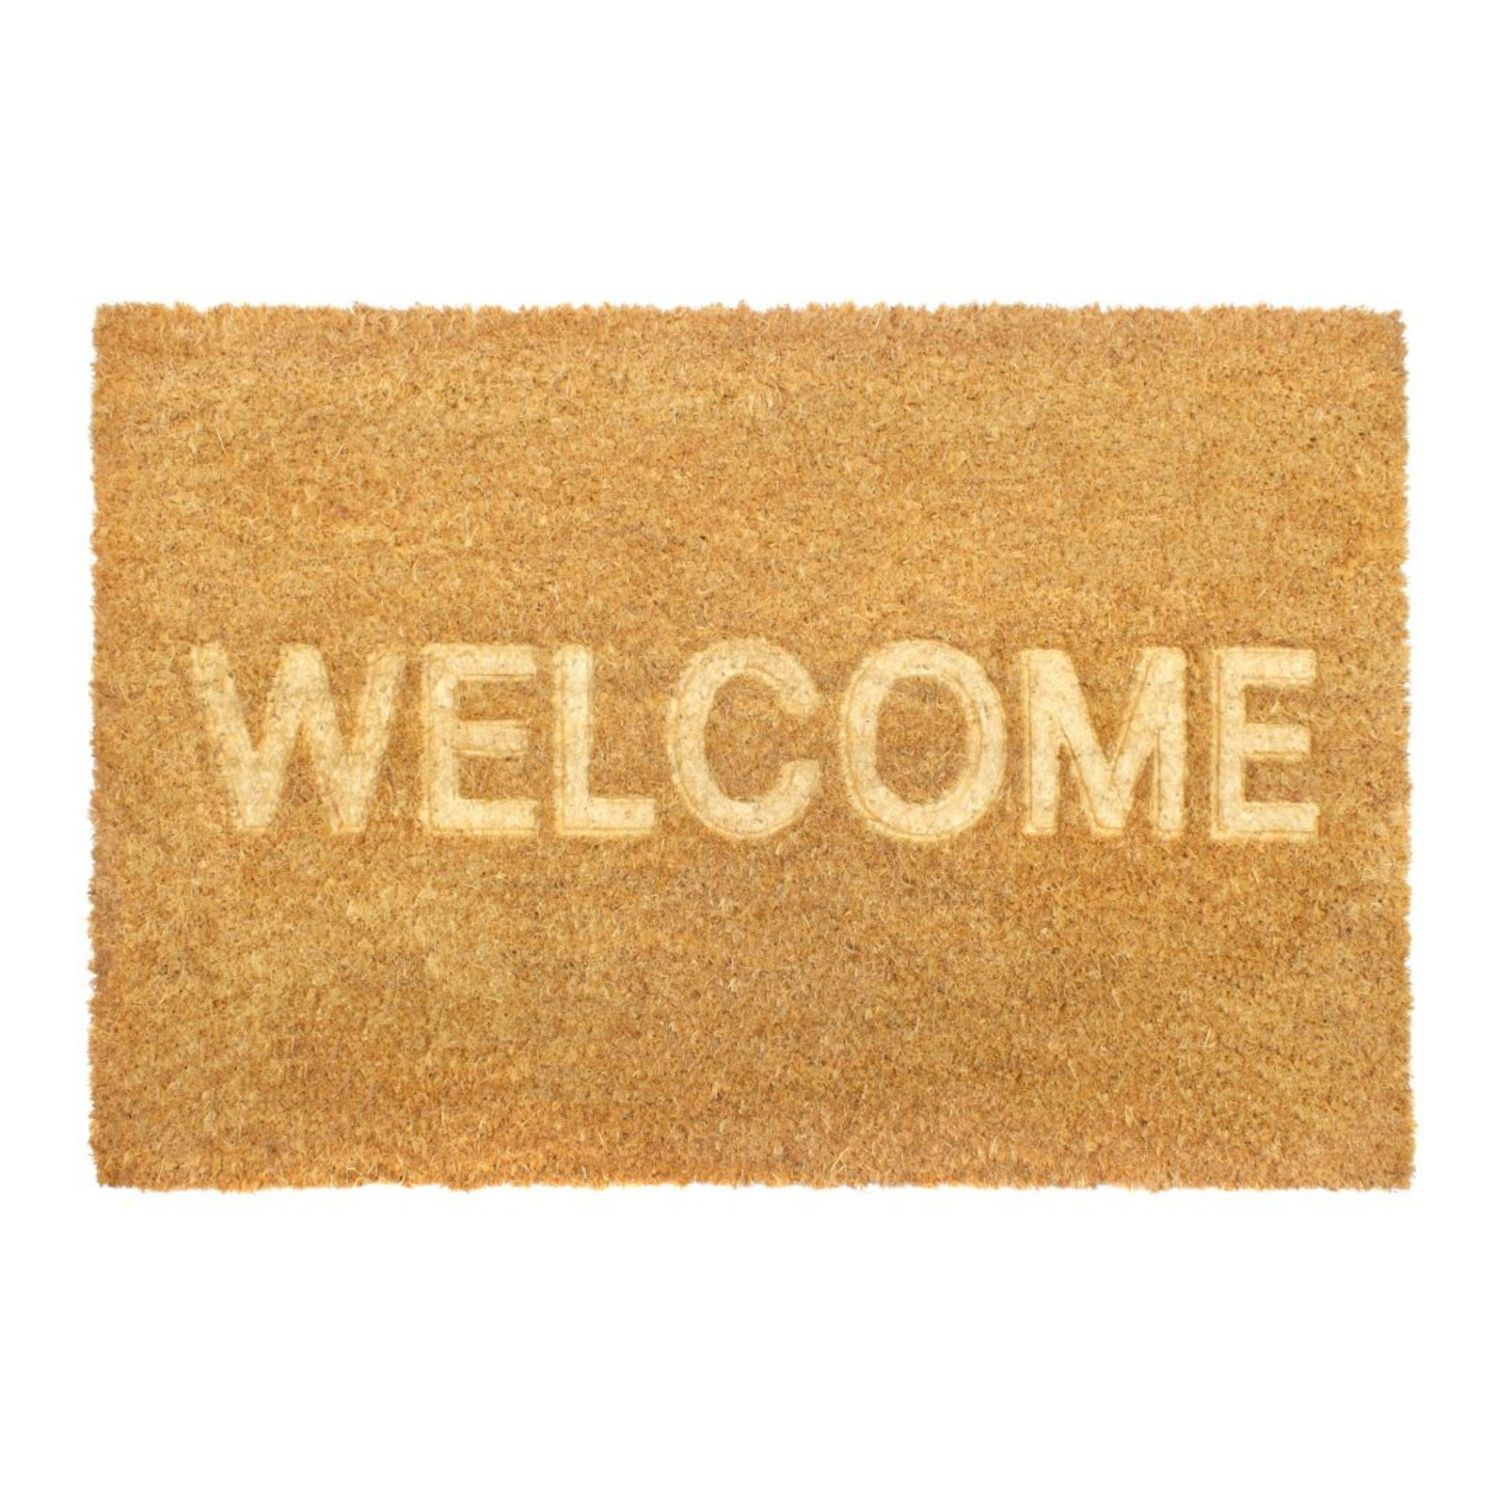 Welcome Doormat 30x17 Inches, Rustic Funny Welcome Mats for Front